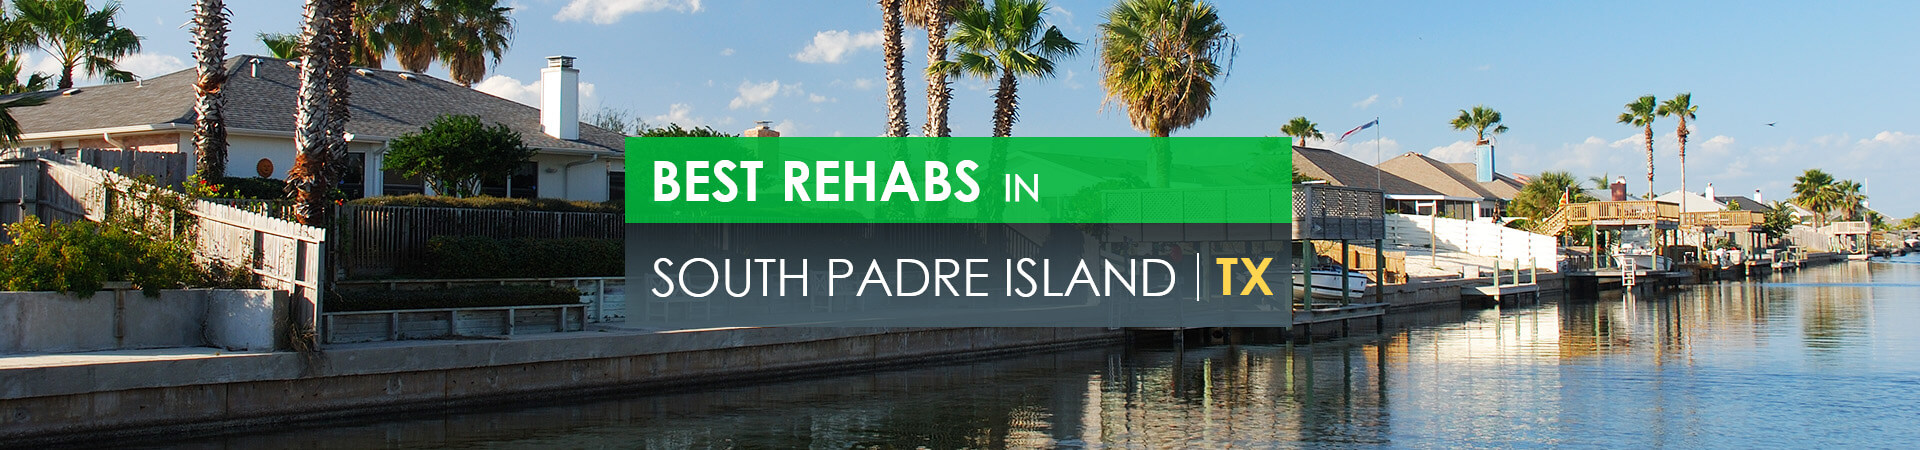 Best rehabs in South Padre Island, TX